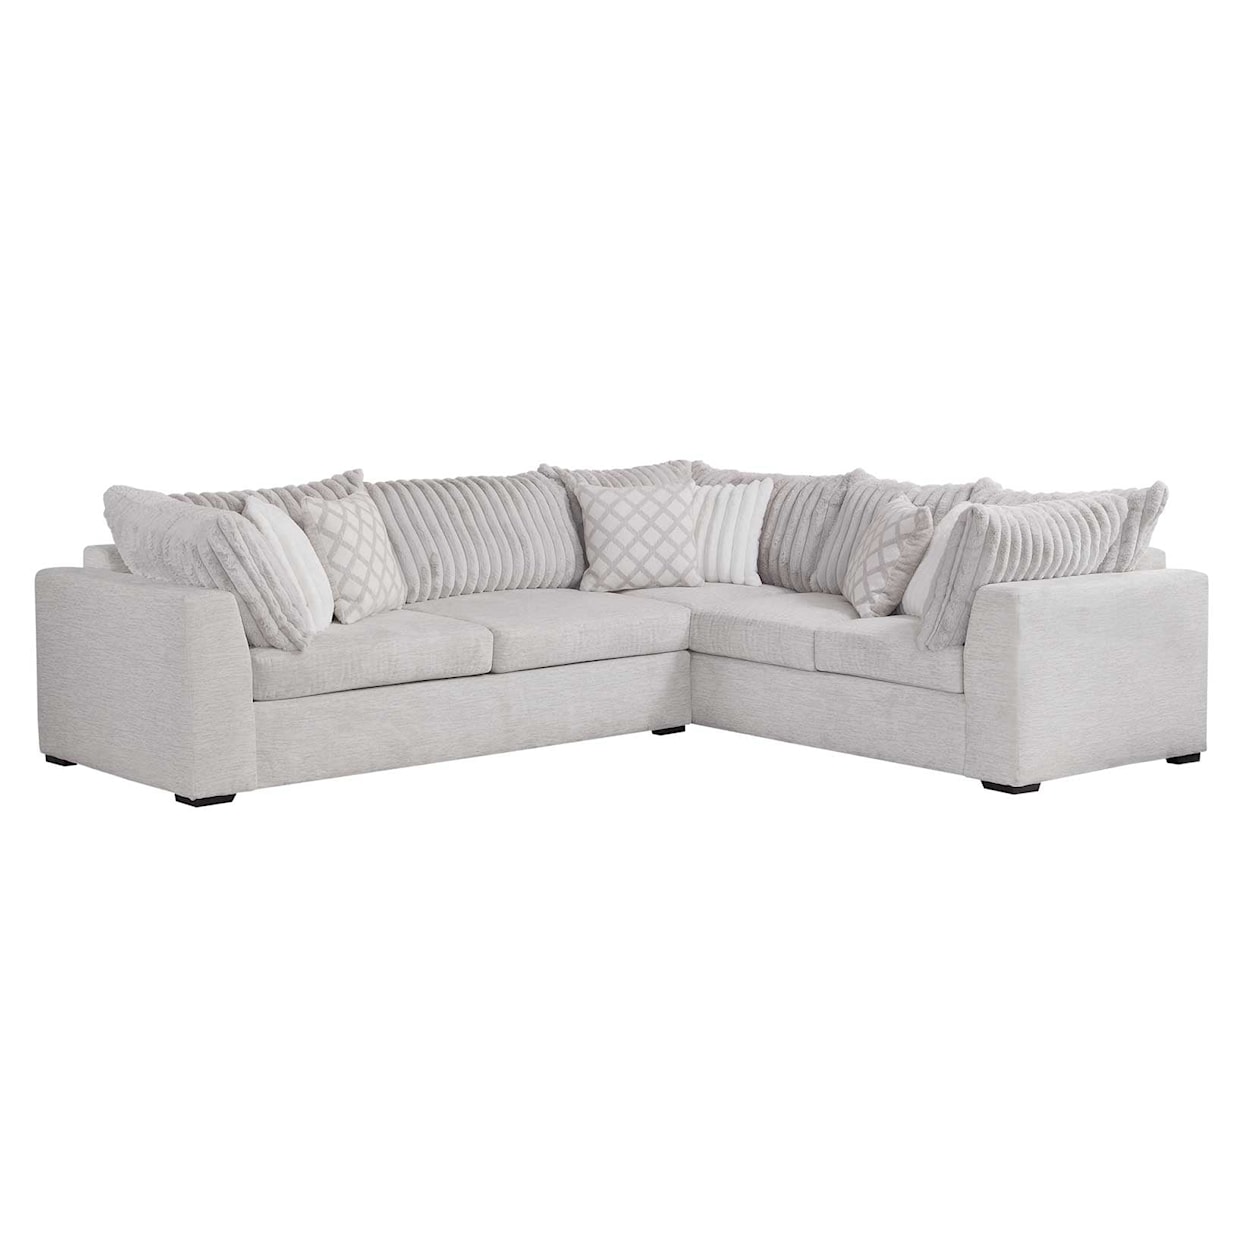 Steve Silver Miguel Sectional Sofa